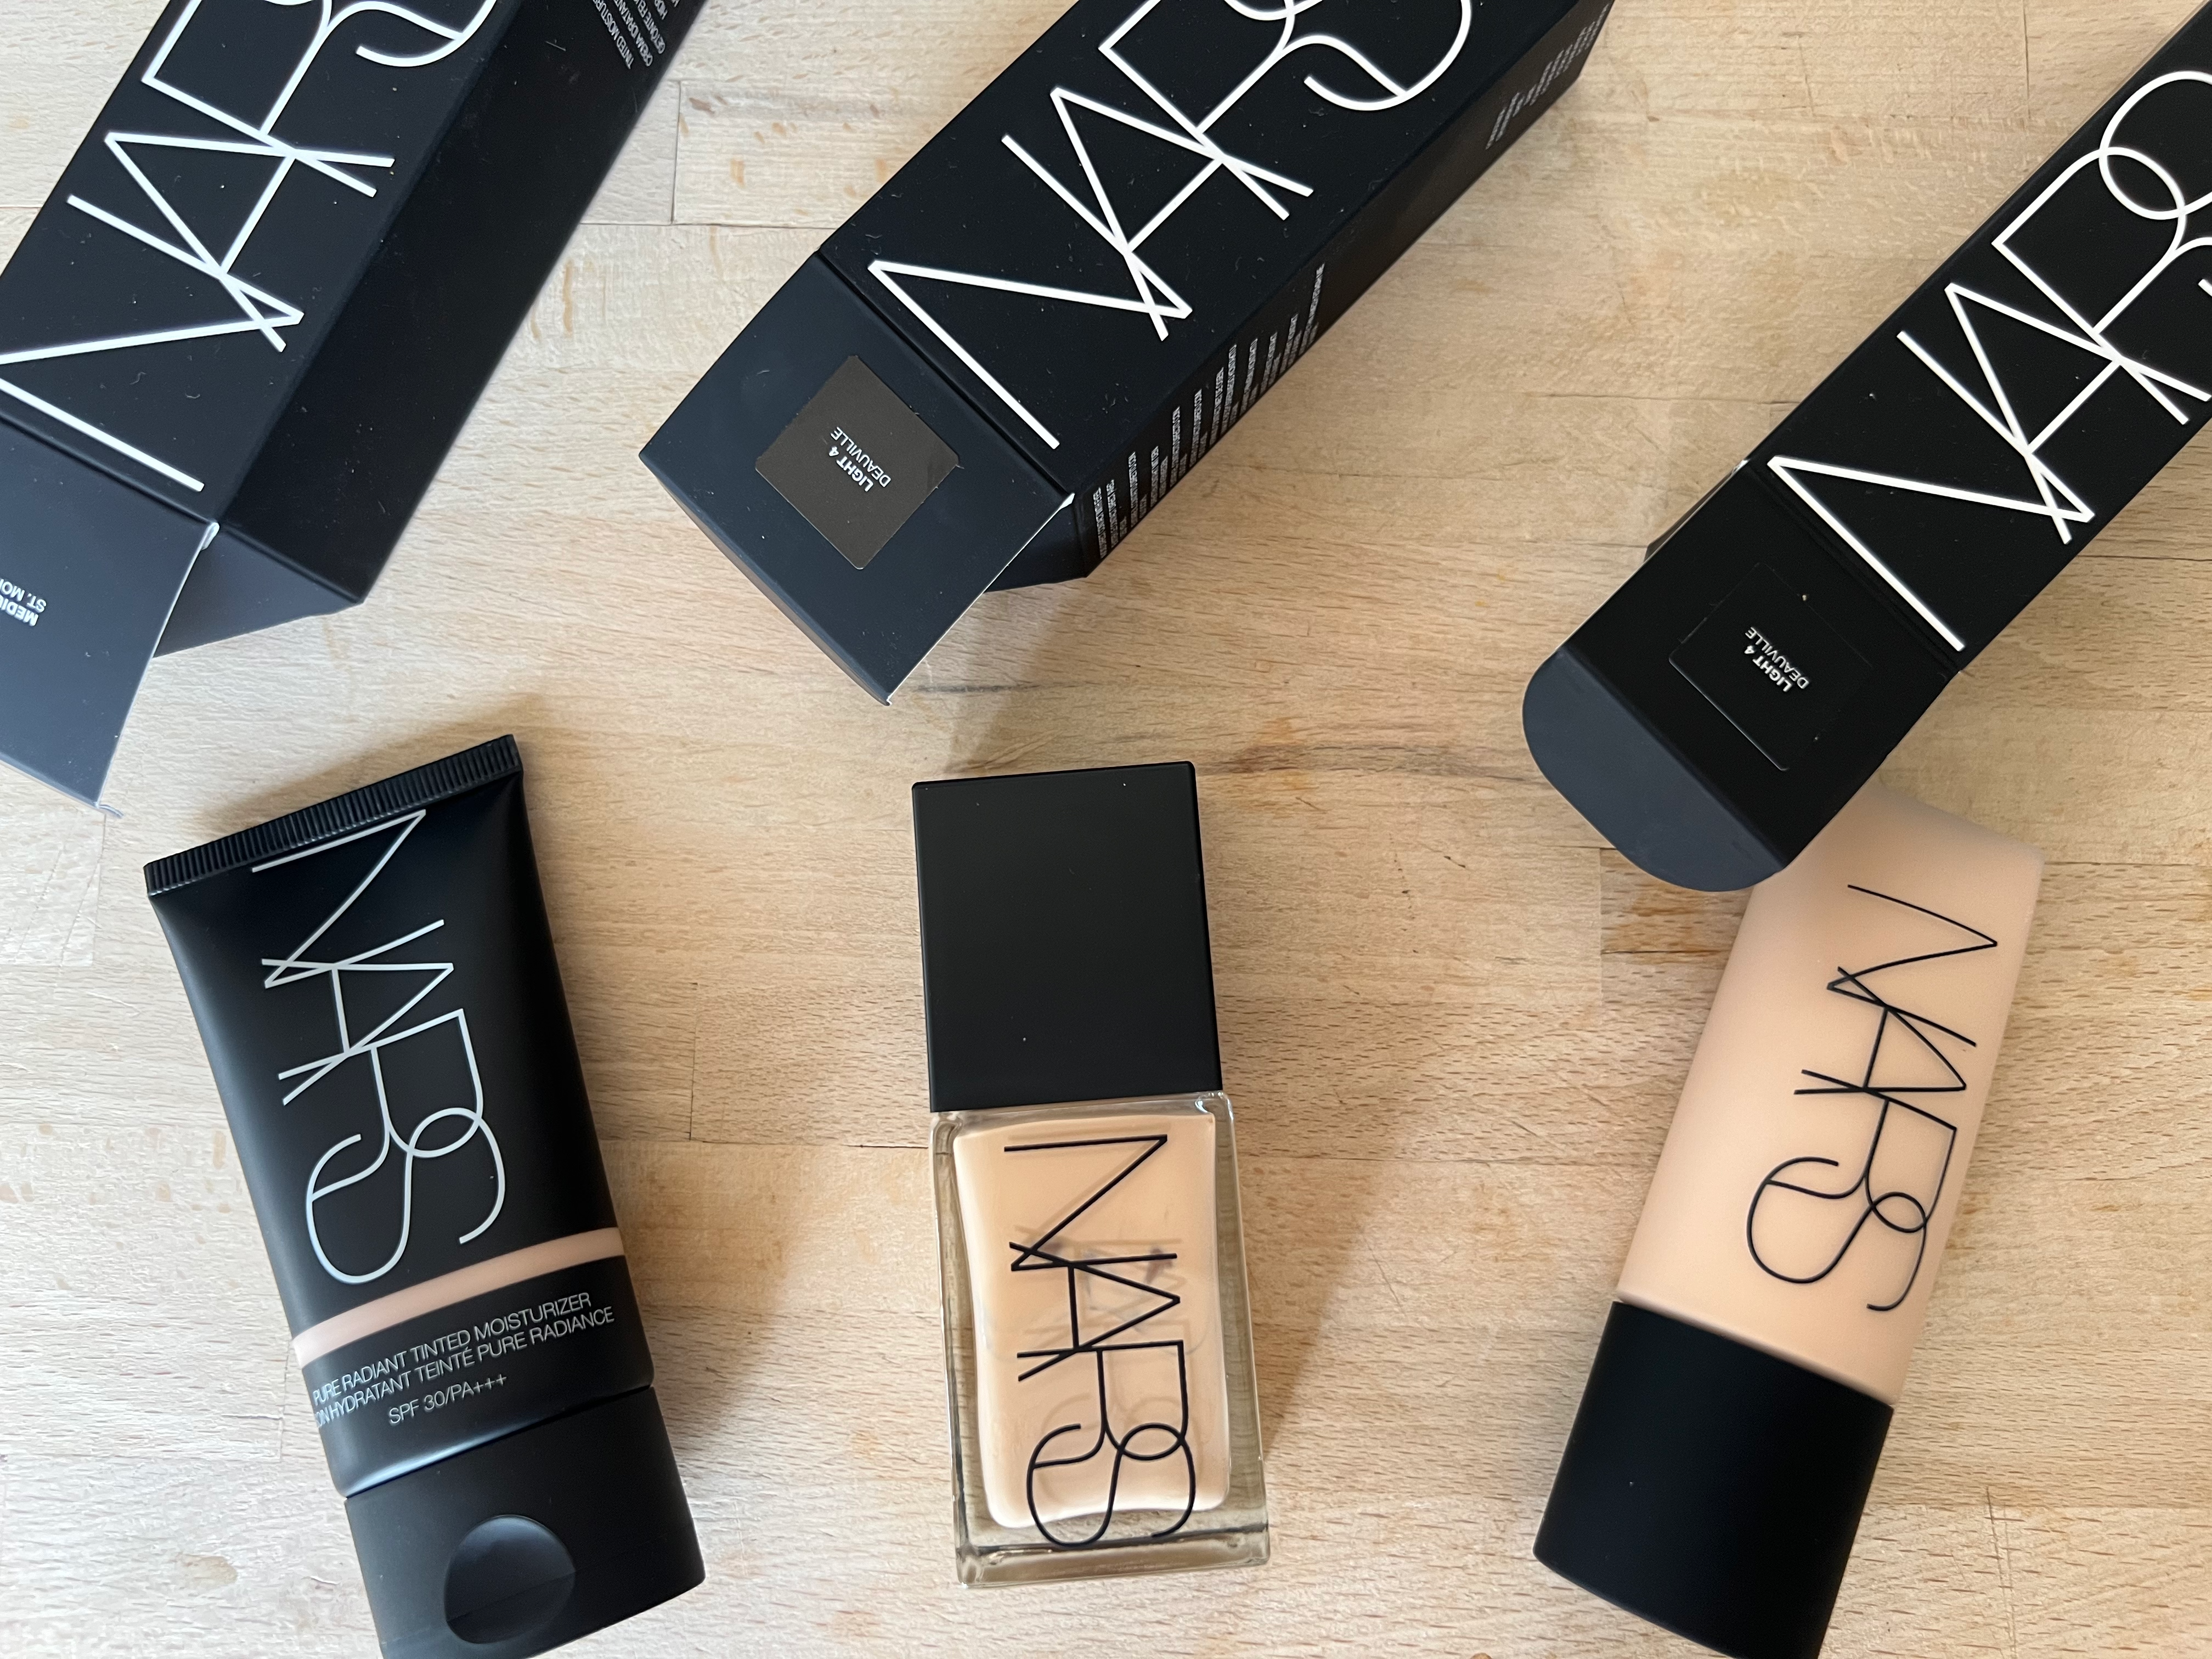 A handful of Nars foundations were put to the test